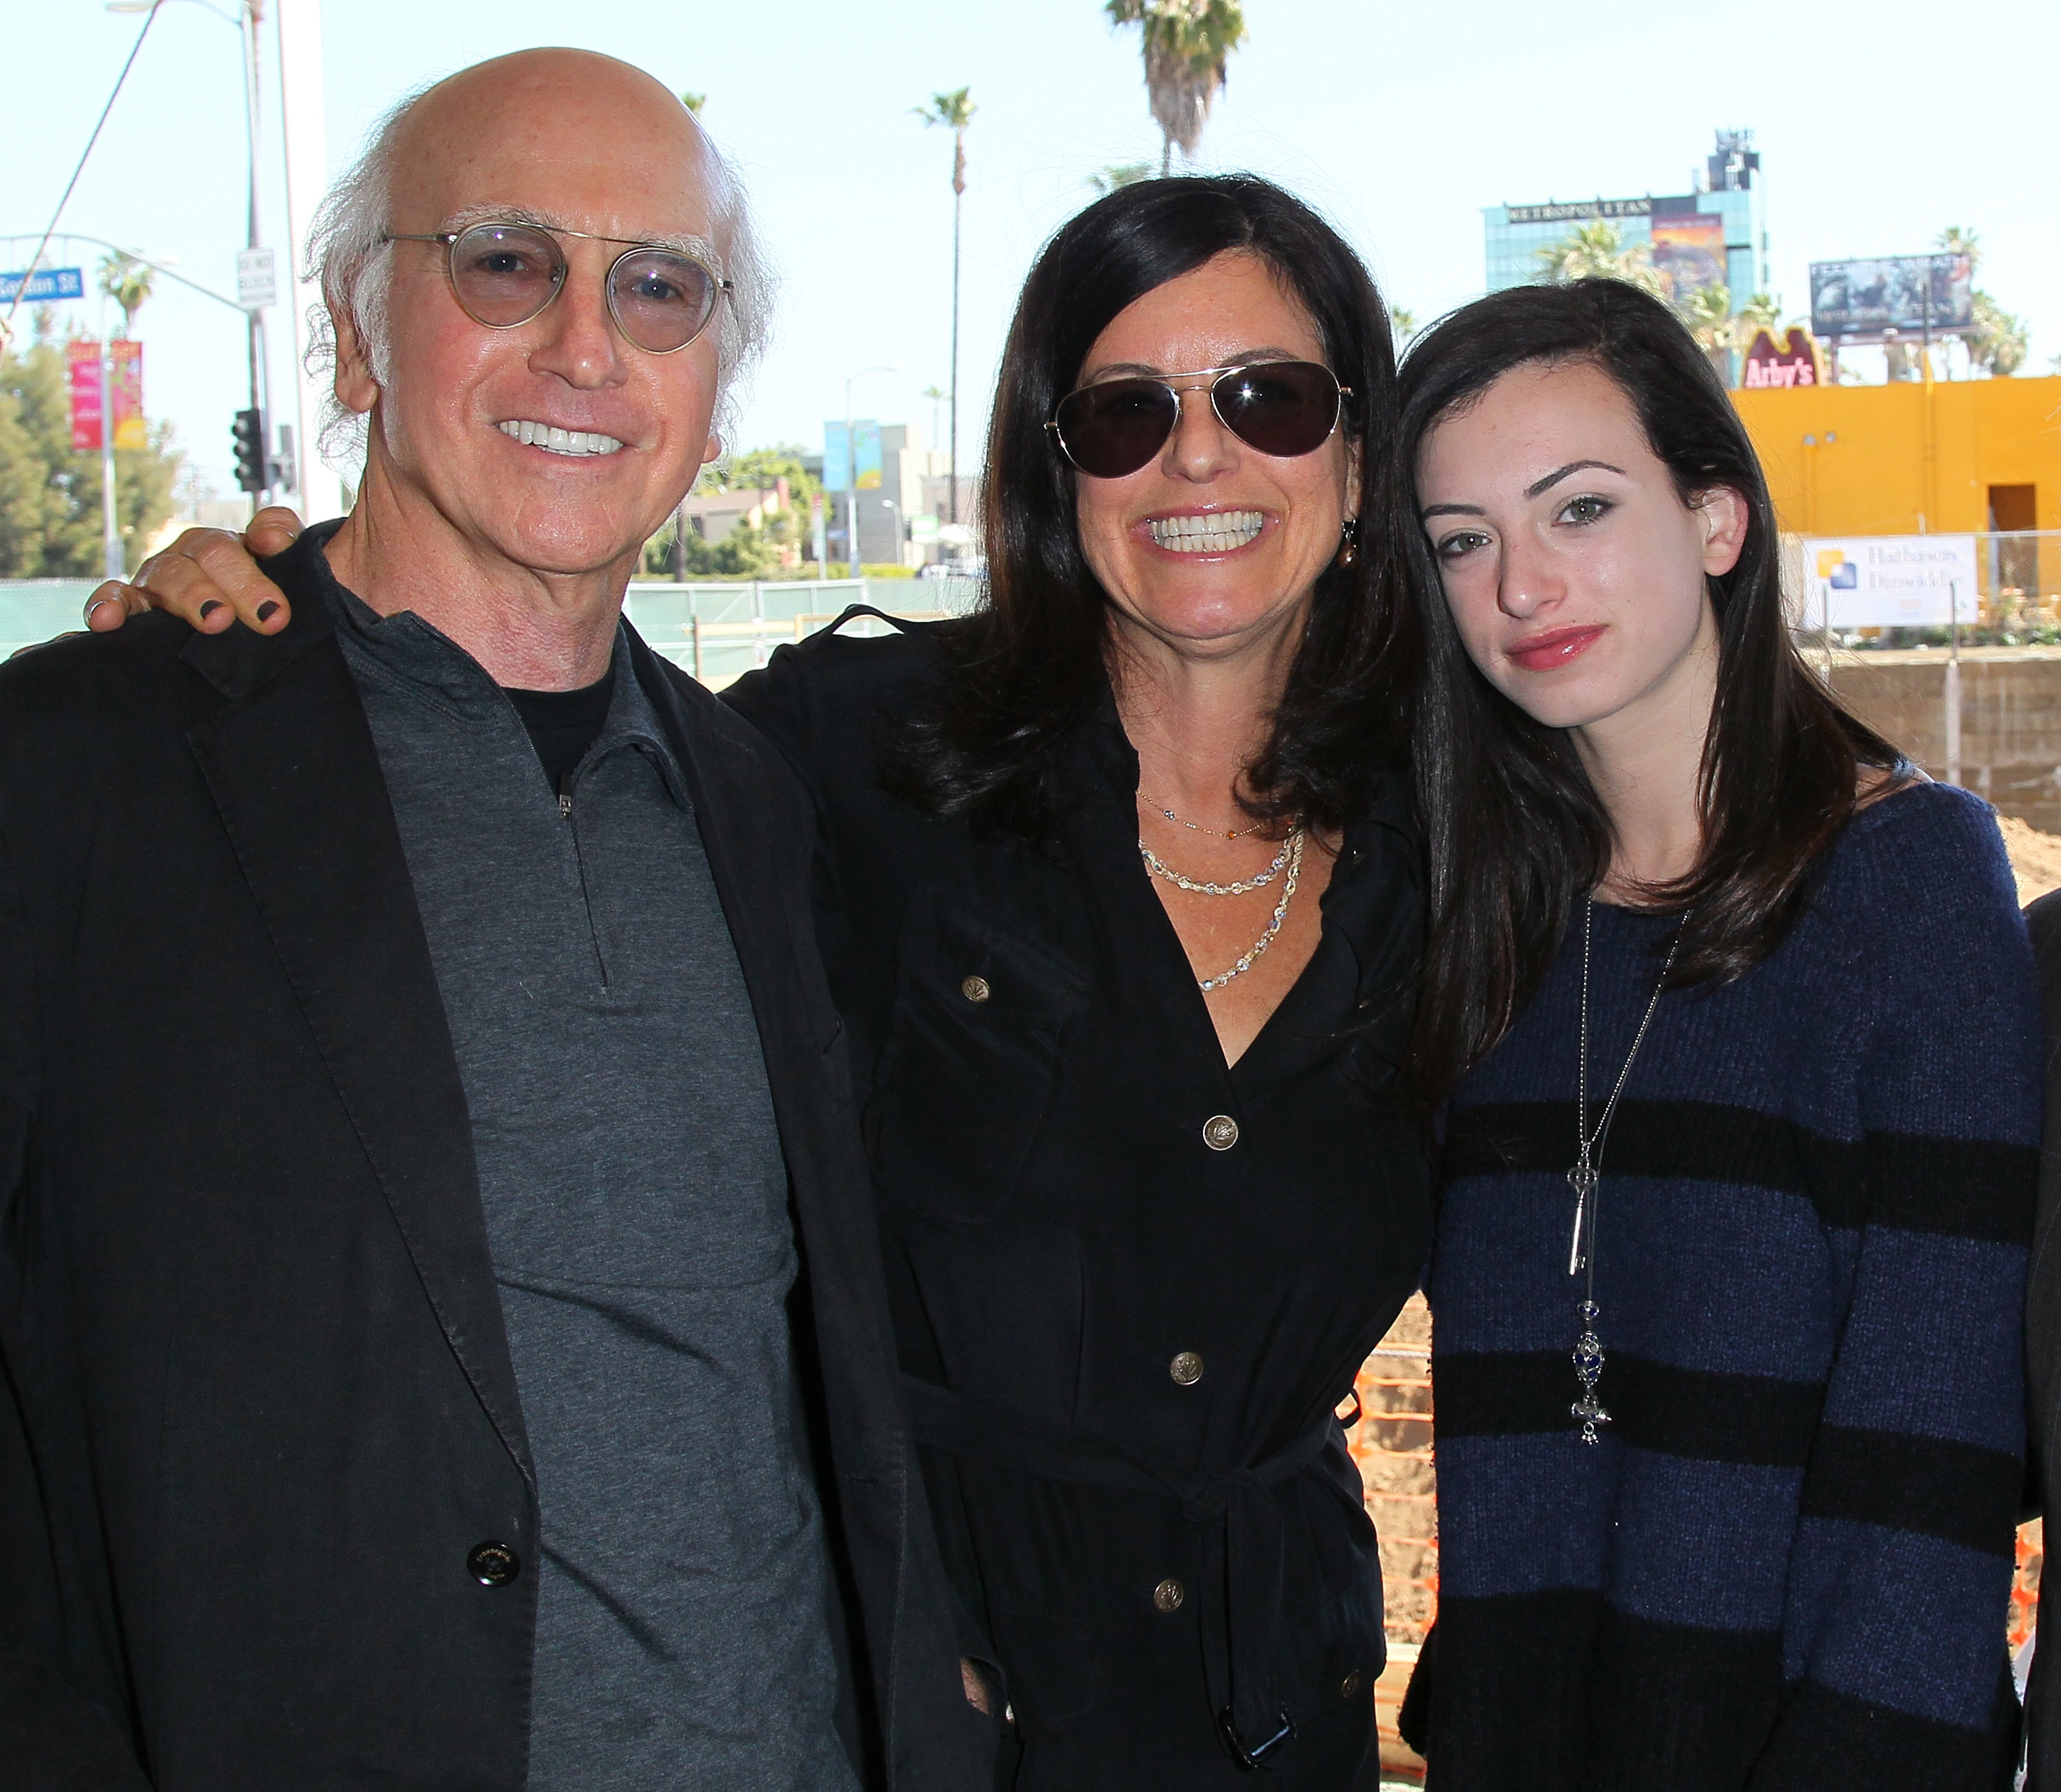 Larry David with his wife and daughter, Cazzie